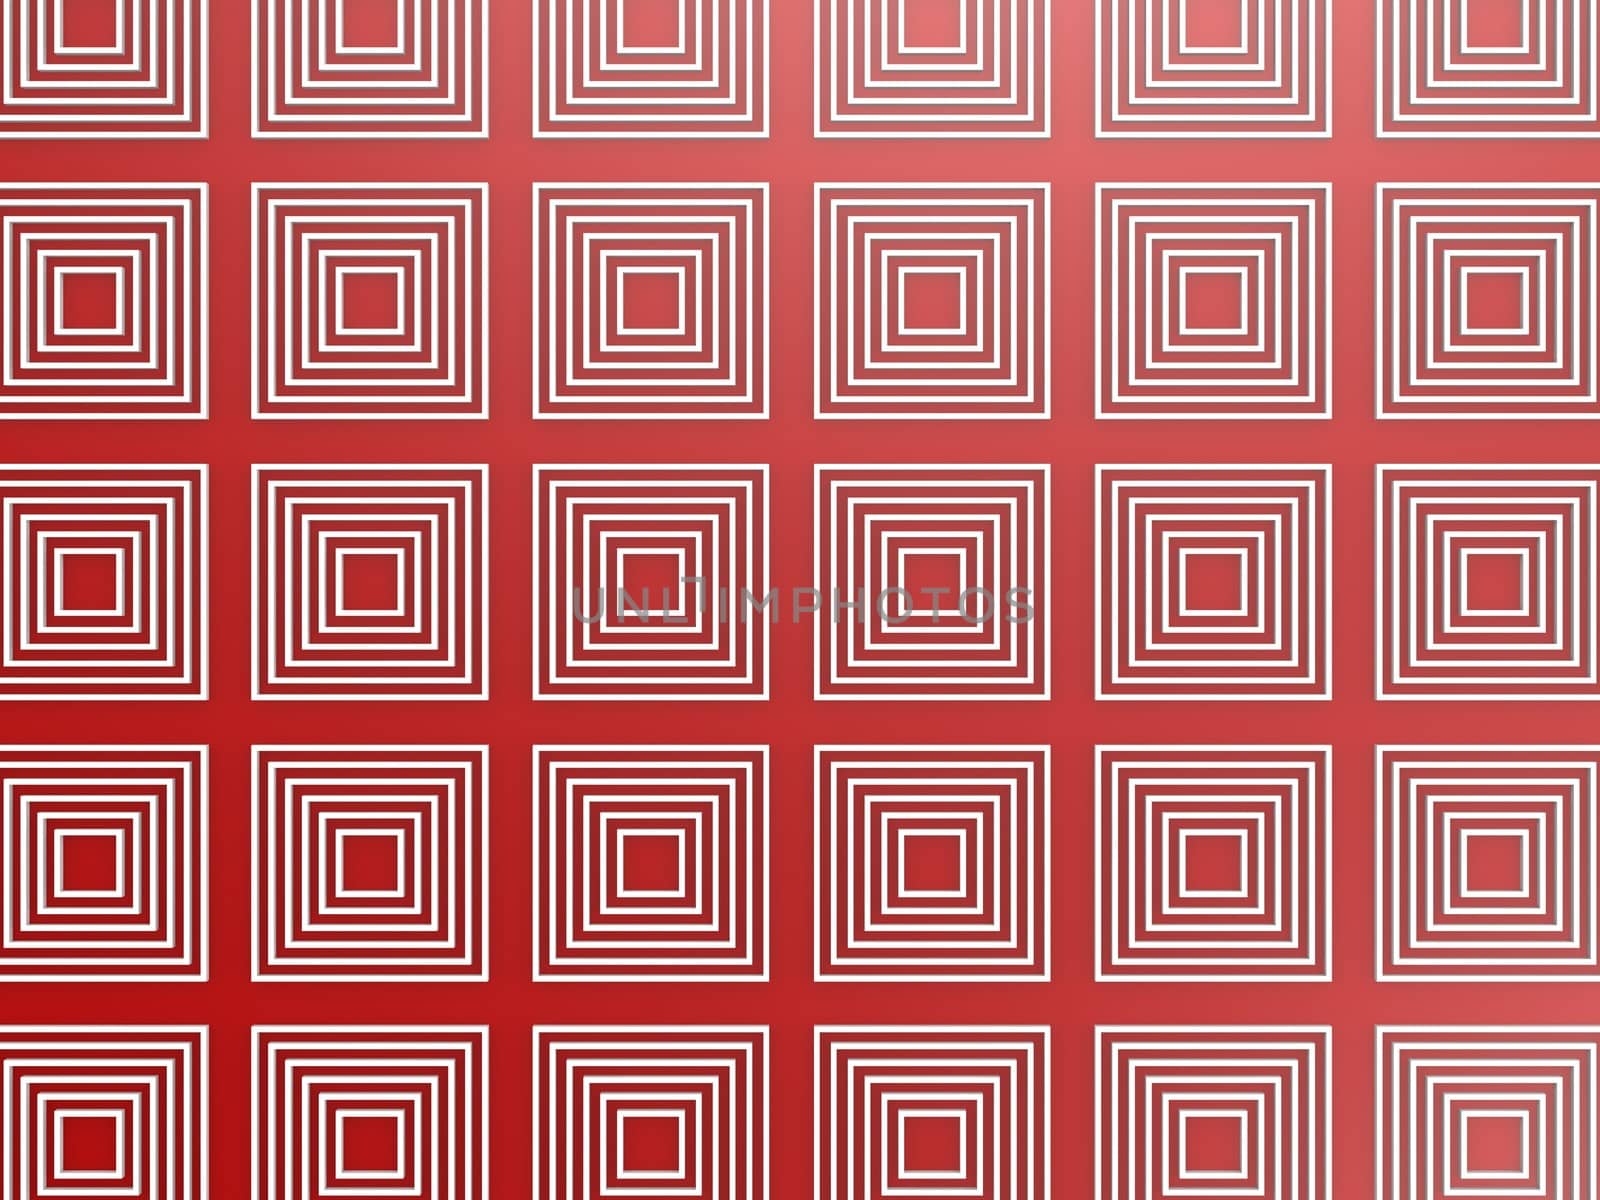 Red square pattern